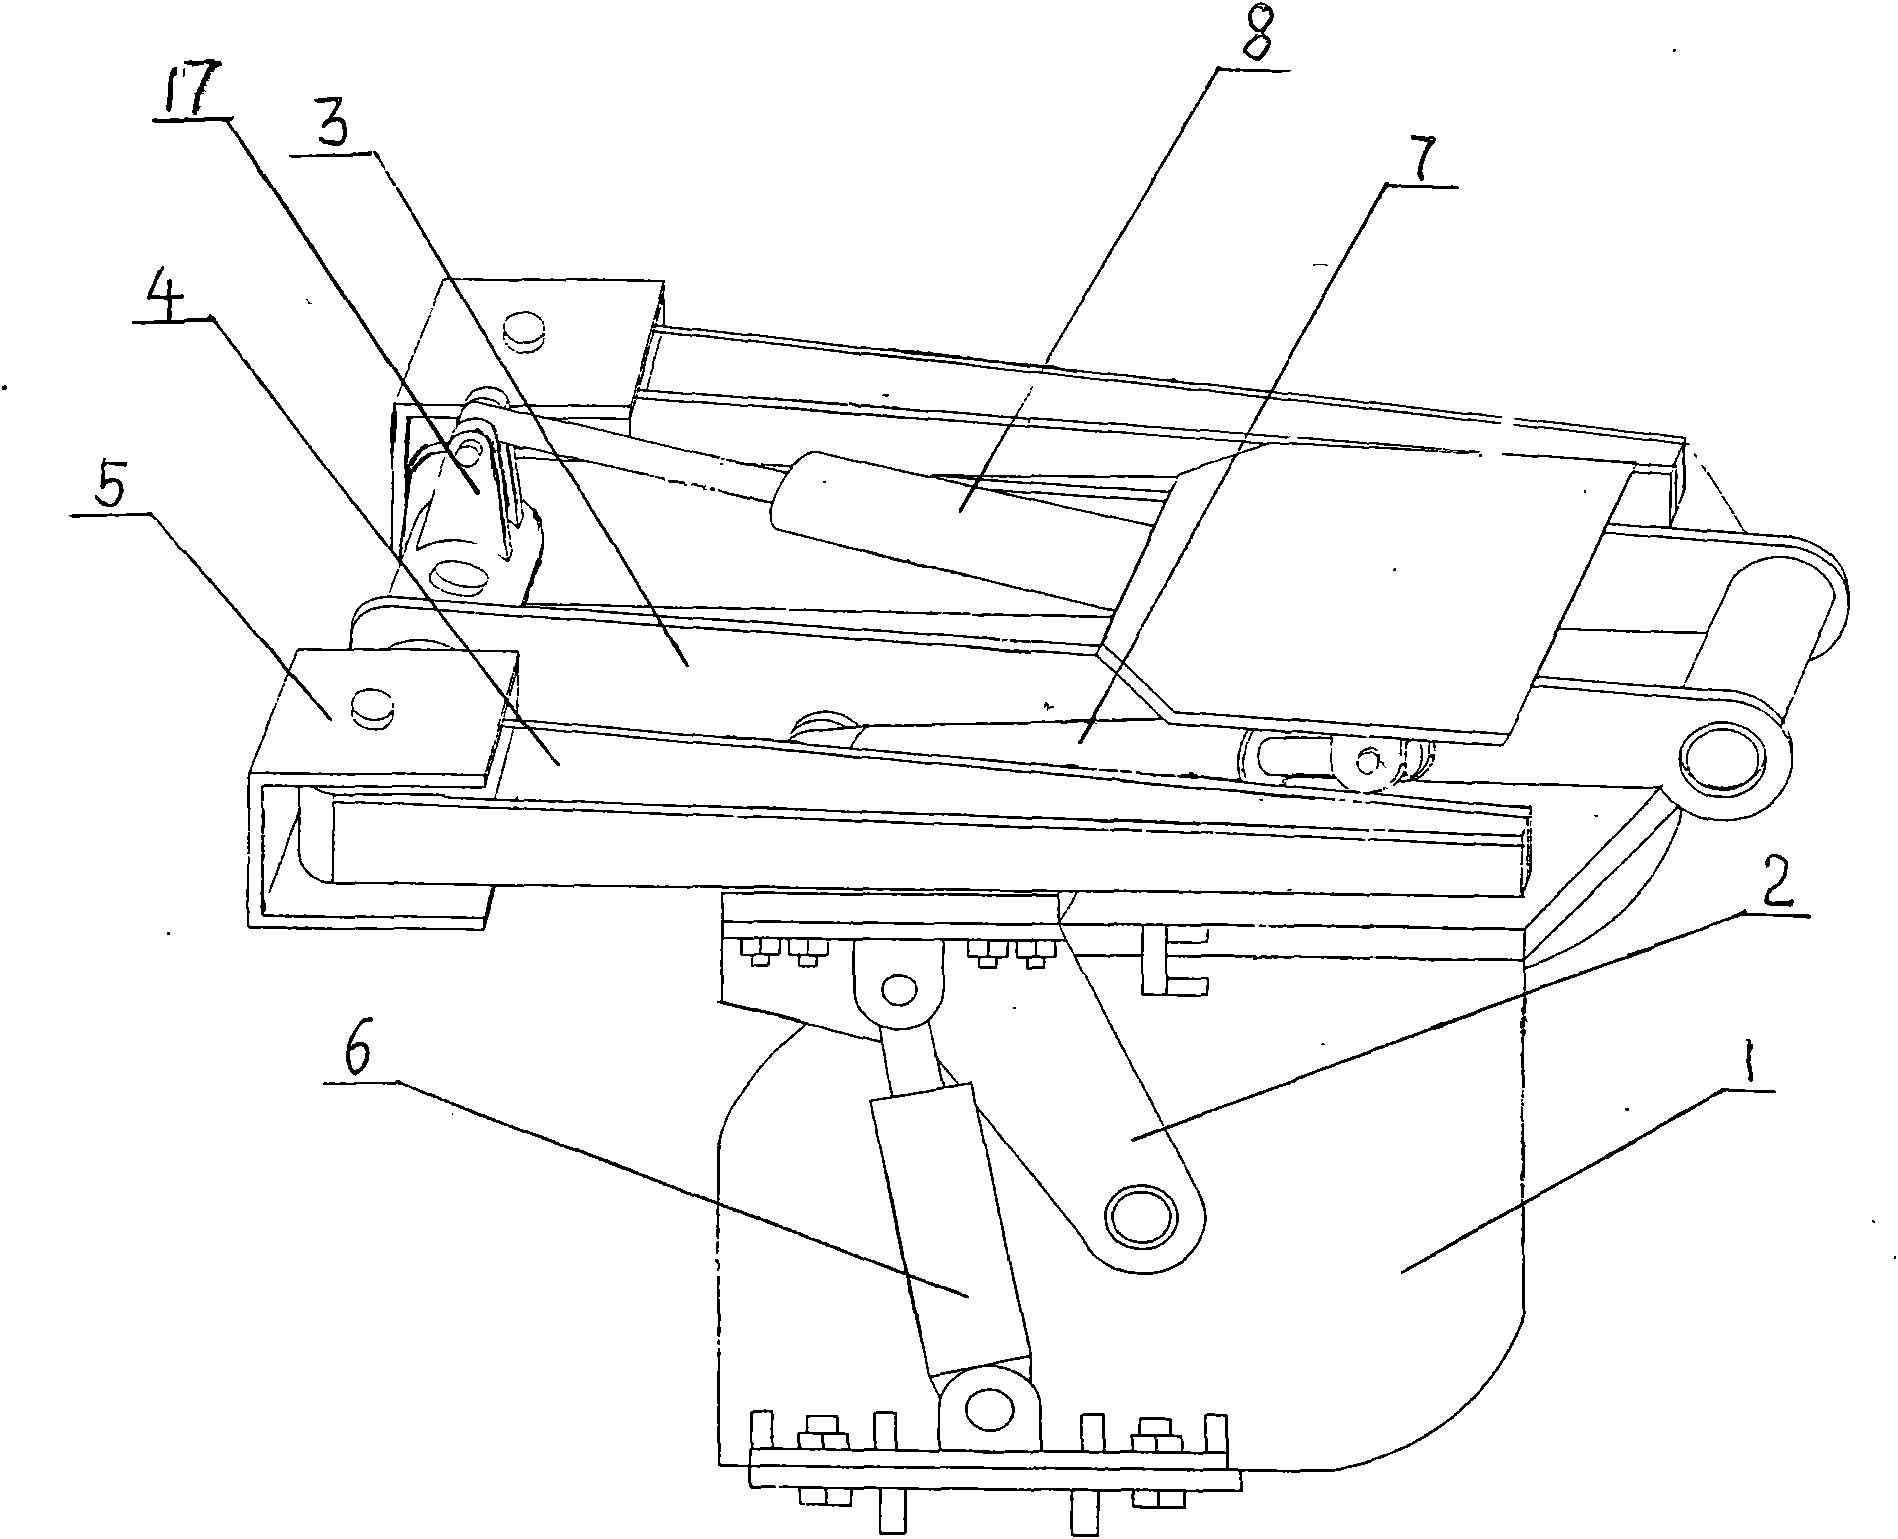 Heading machine provided with cantilever type front canopy supporting protection device